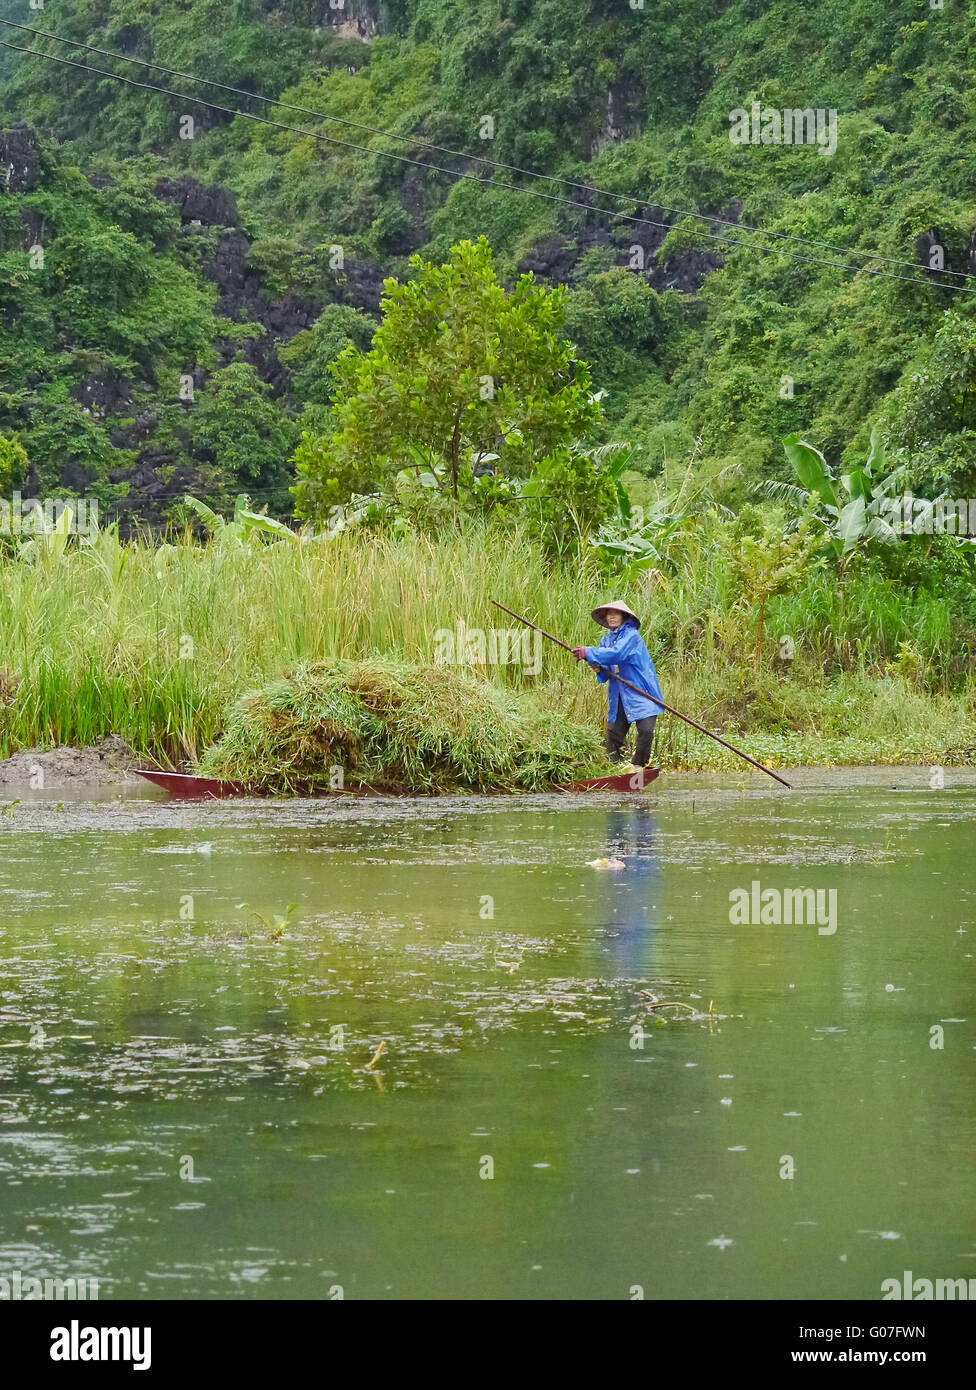 Vietnamese woman on river bringing in rice harvest Stock Photo